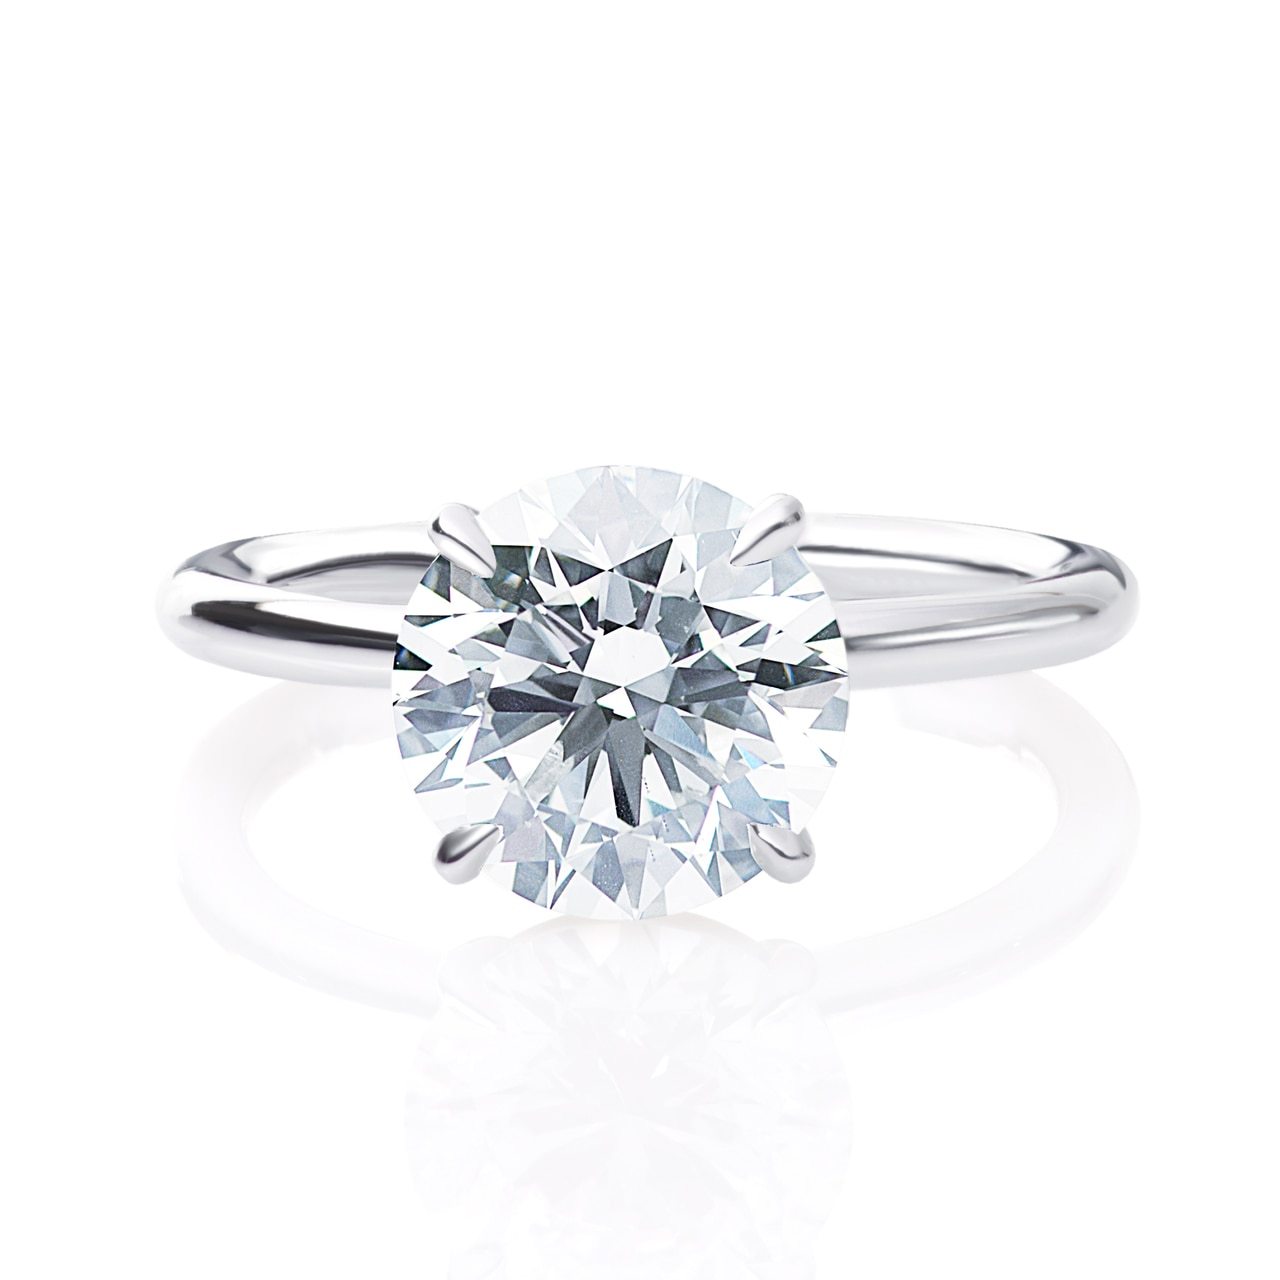 Classic Four Prong Solitaire Diamond Ring